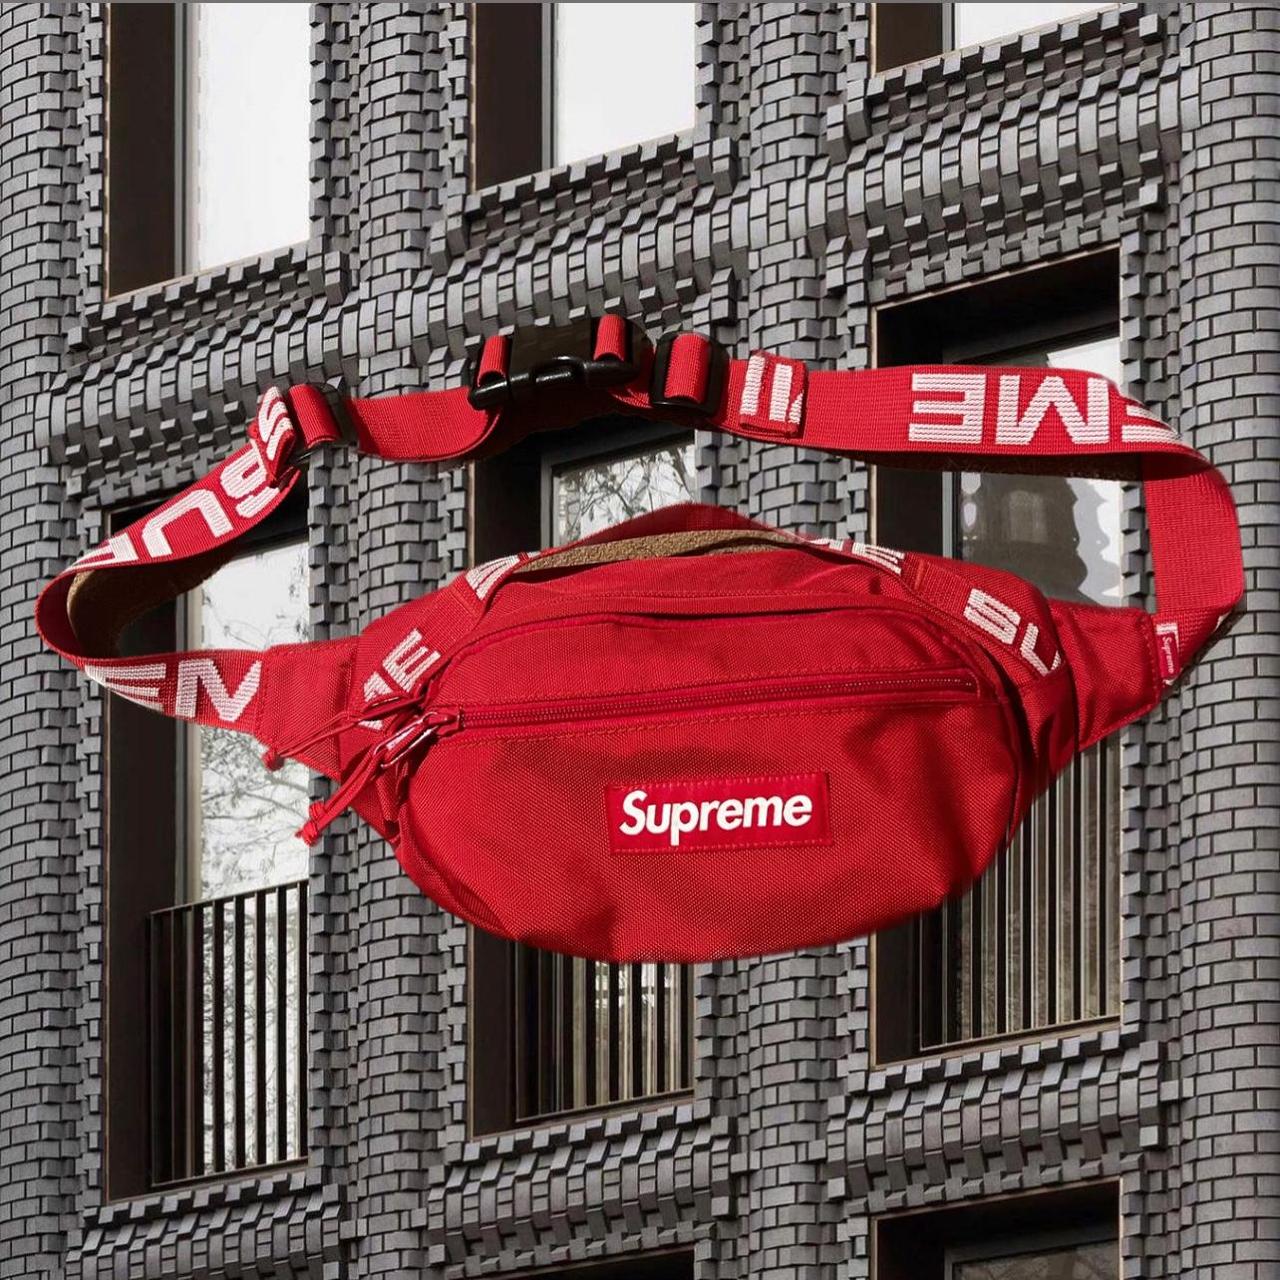 100+Authentic+2018+Supreme+Waist+Bag+Fw18+Red+Fanny+Pack for sale